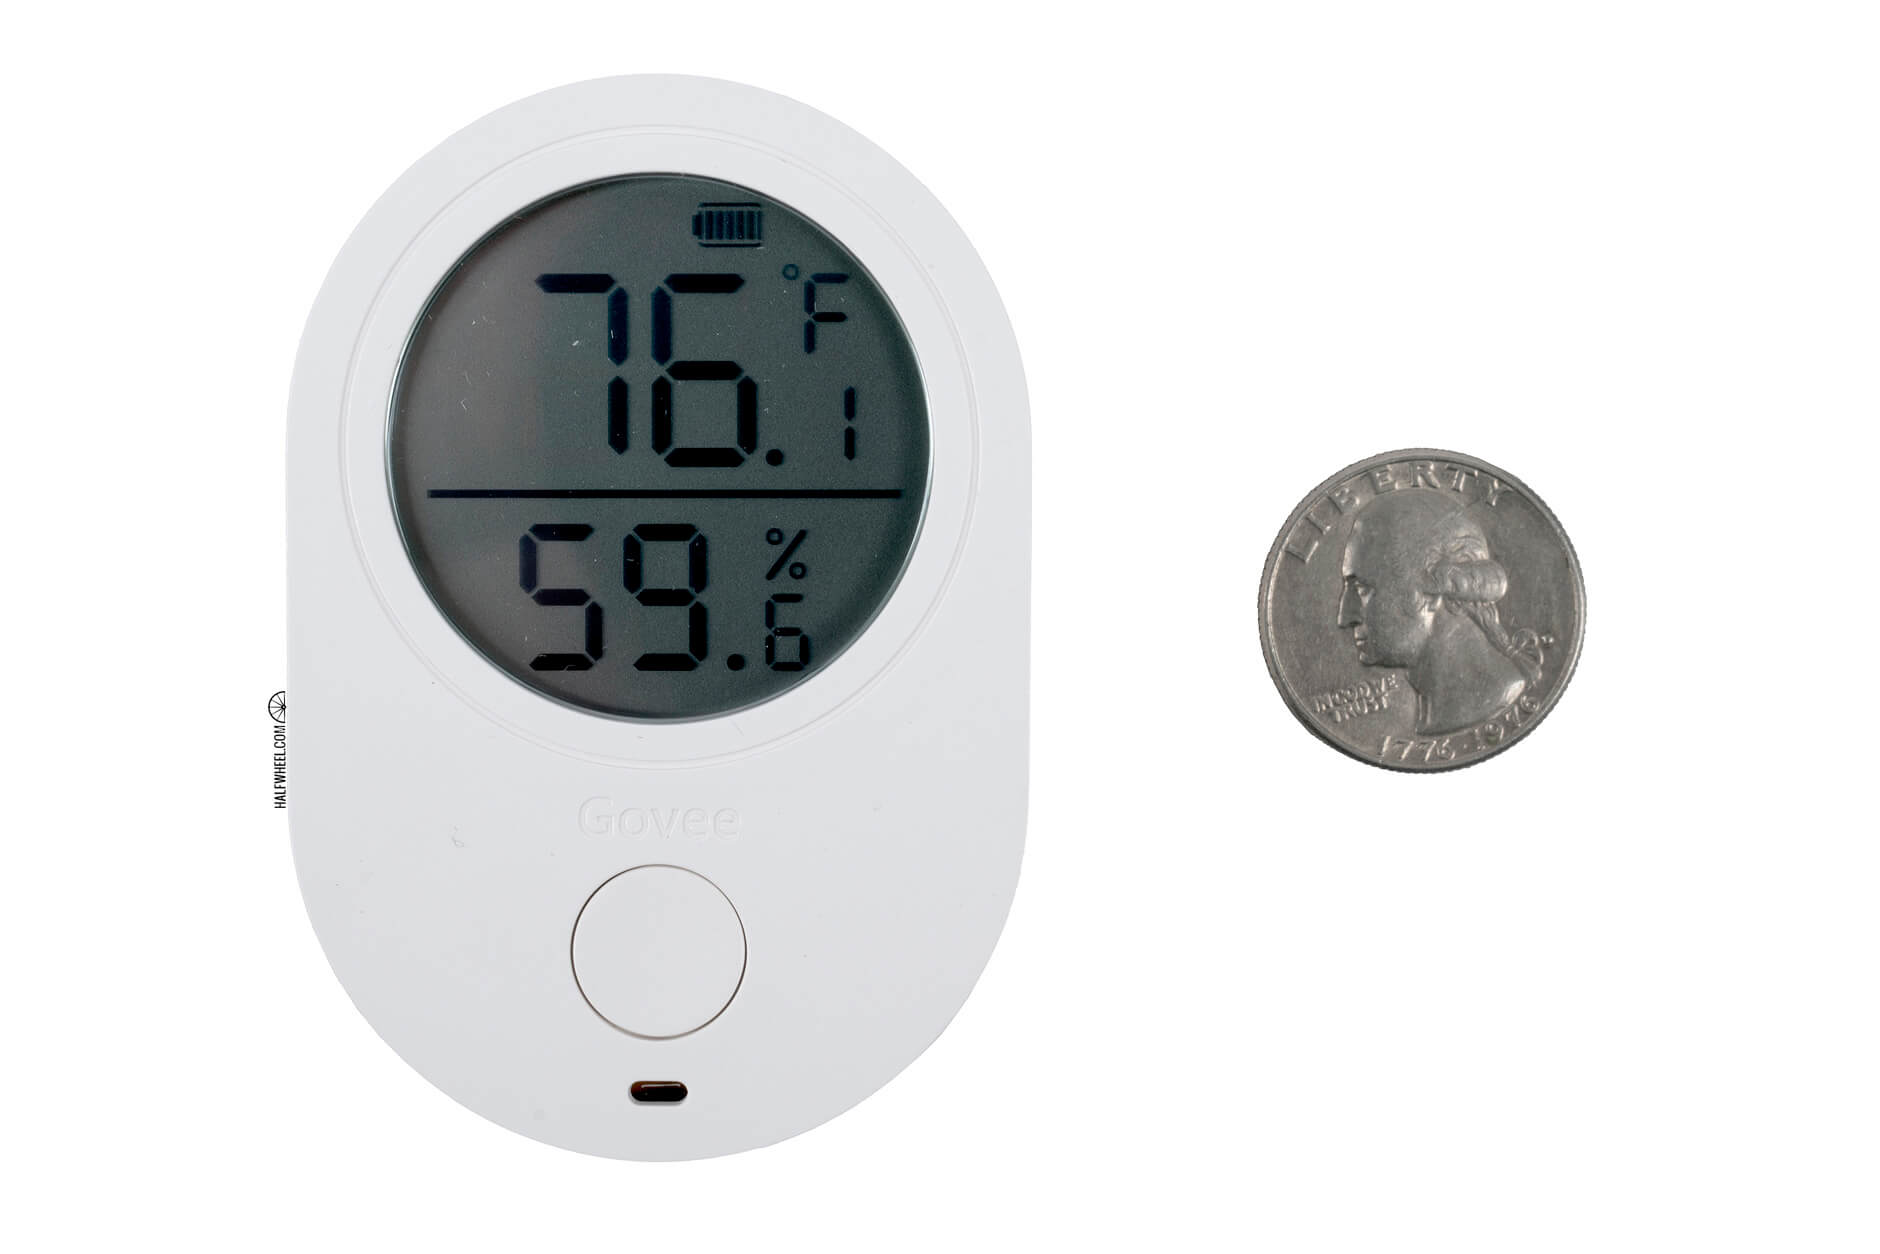 Govee Temperature Humidity Monitor Review - GrowDoctor Guides